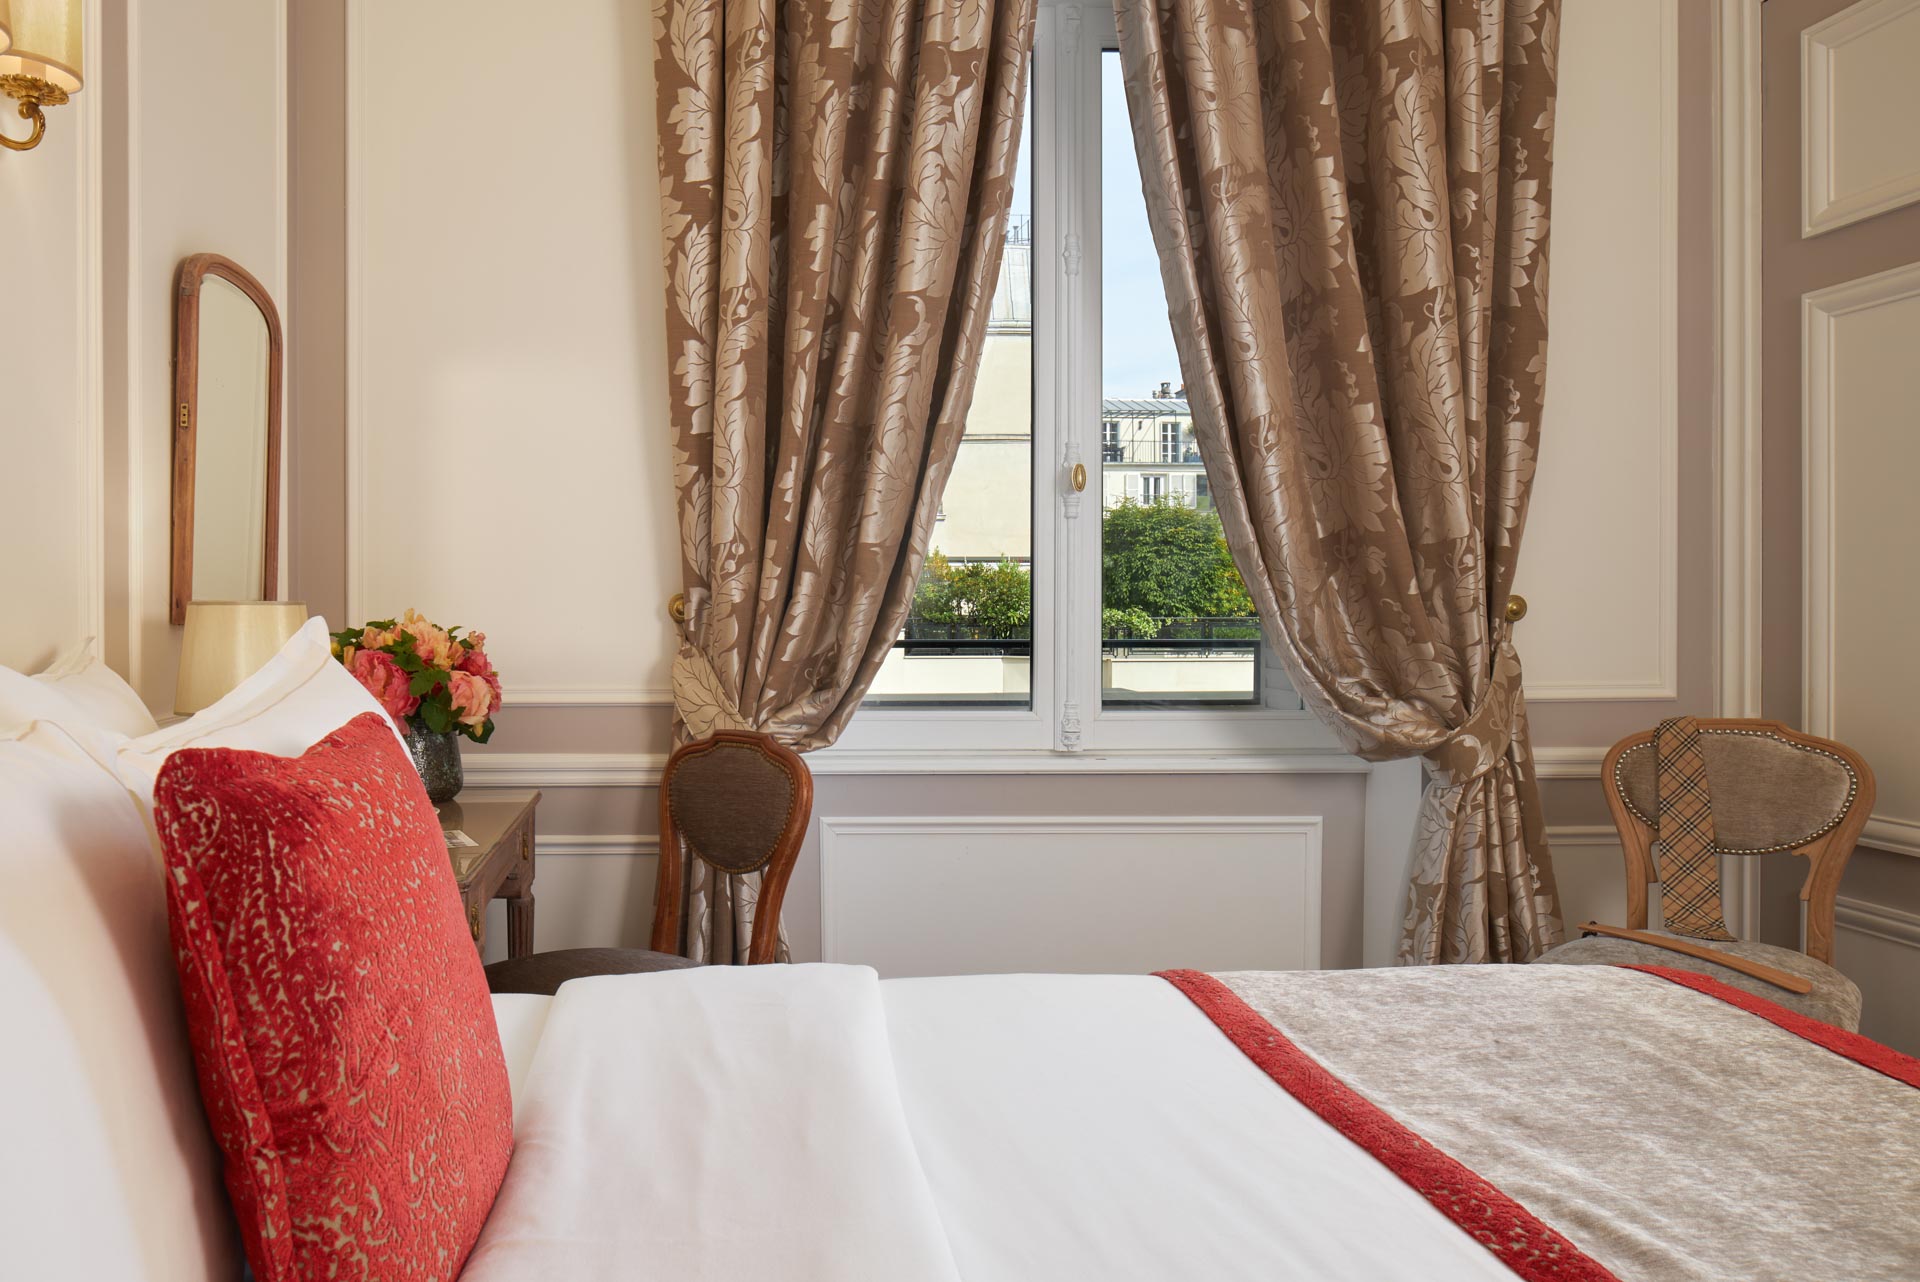 Hotel Regina Louvre  Rooms and suites with view of the Eiffel tower